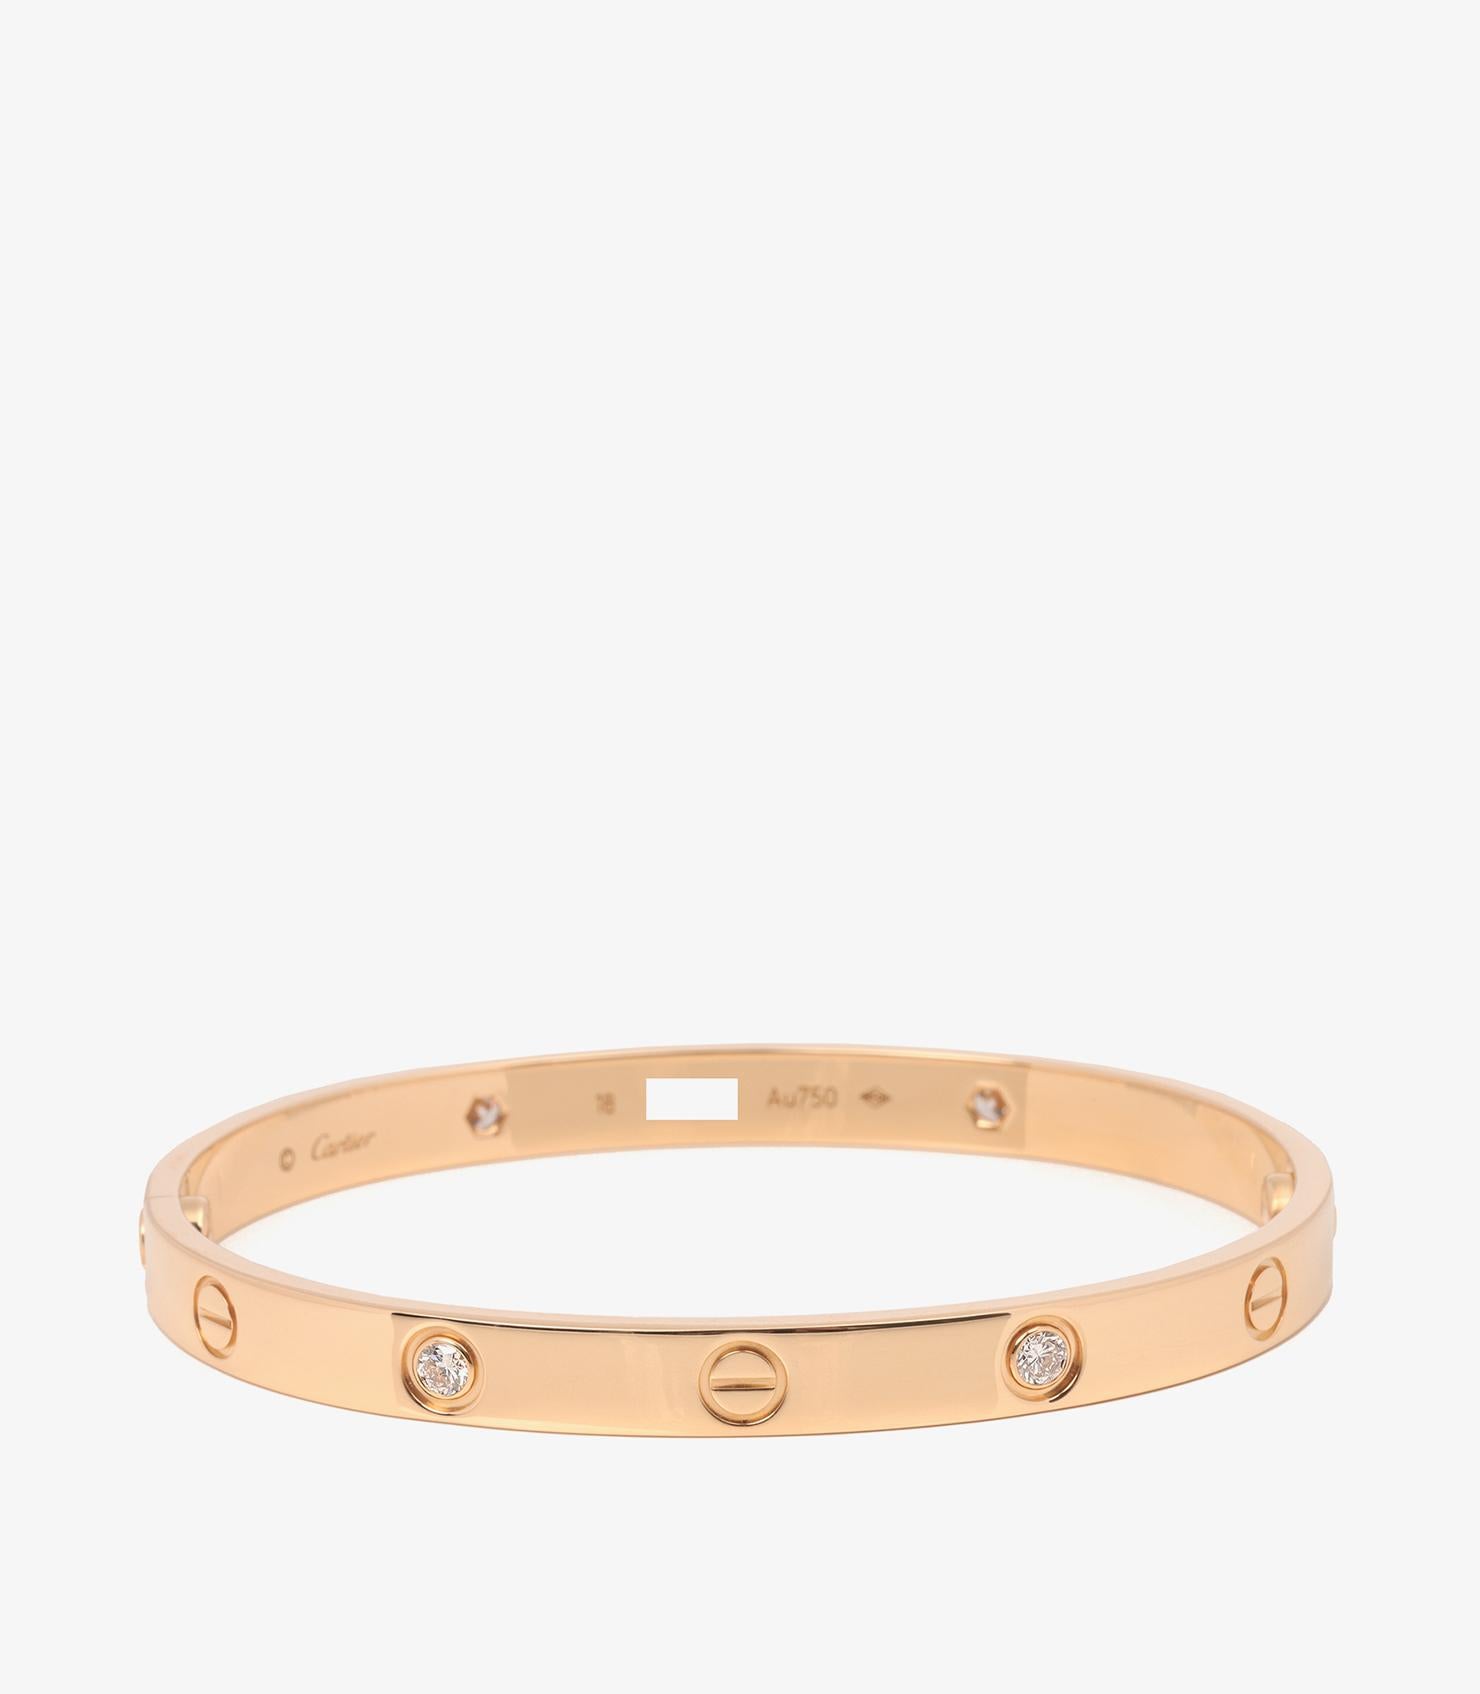 Cartier 4 Diamond 18ct Yellow Gold Love Bangle

Brand: Cartier
Model: 4 Diamond Love Bangle
Product Type: Bracelet
Serial Number: CQ1216
Age: Circa 2019
Accompanied By: Cartier Box, Certificate, Service Papers, Screwdriver
Material(s): 18ct Yellow